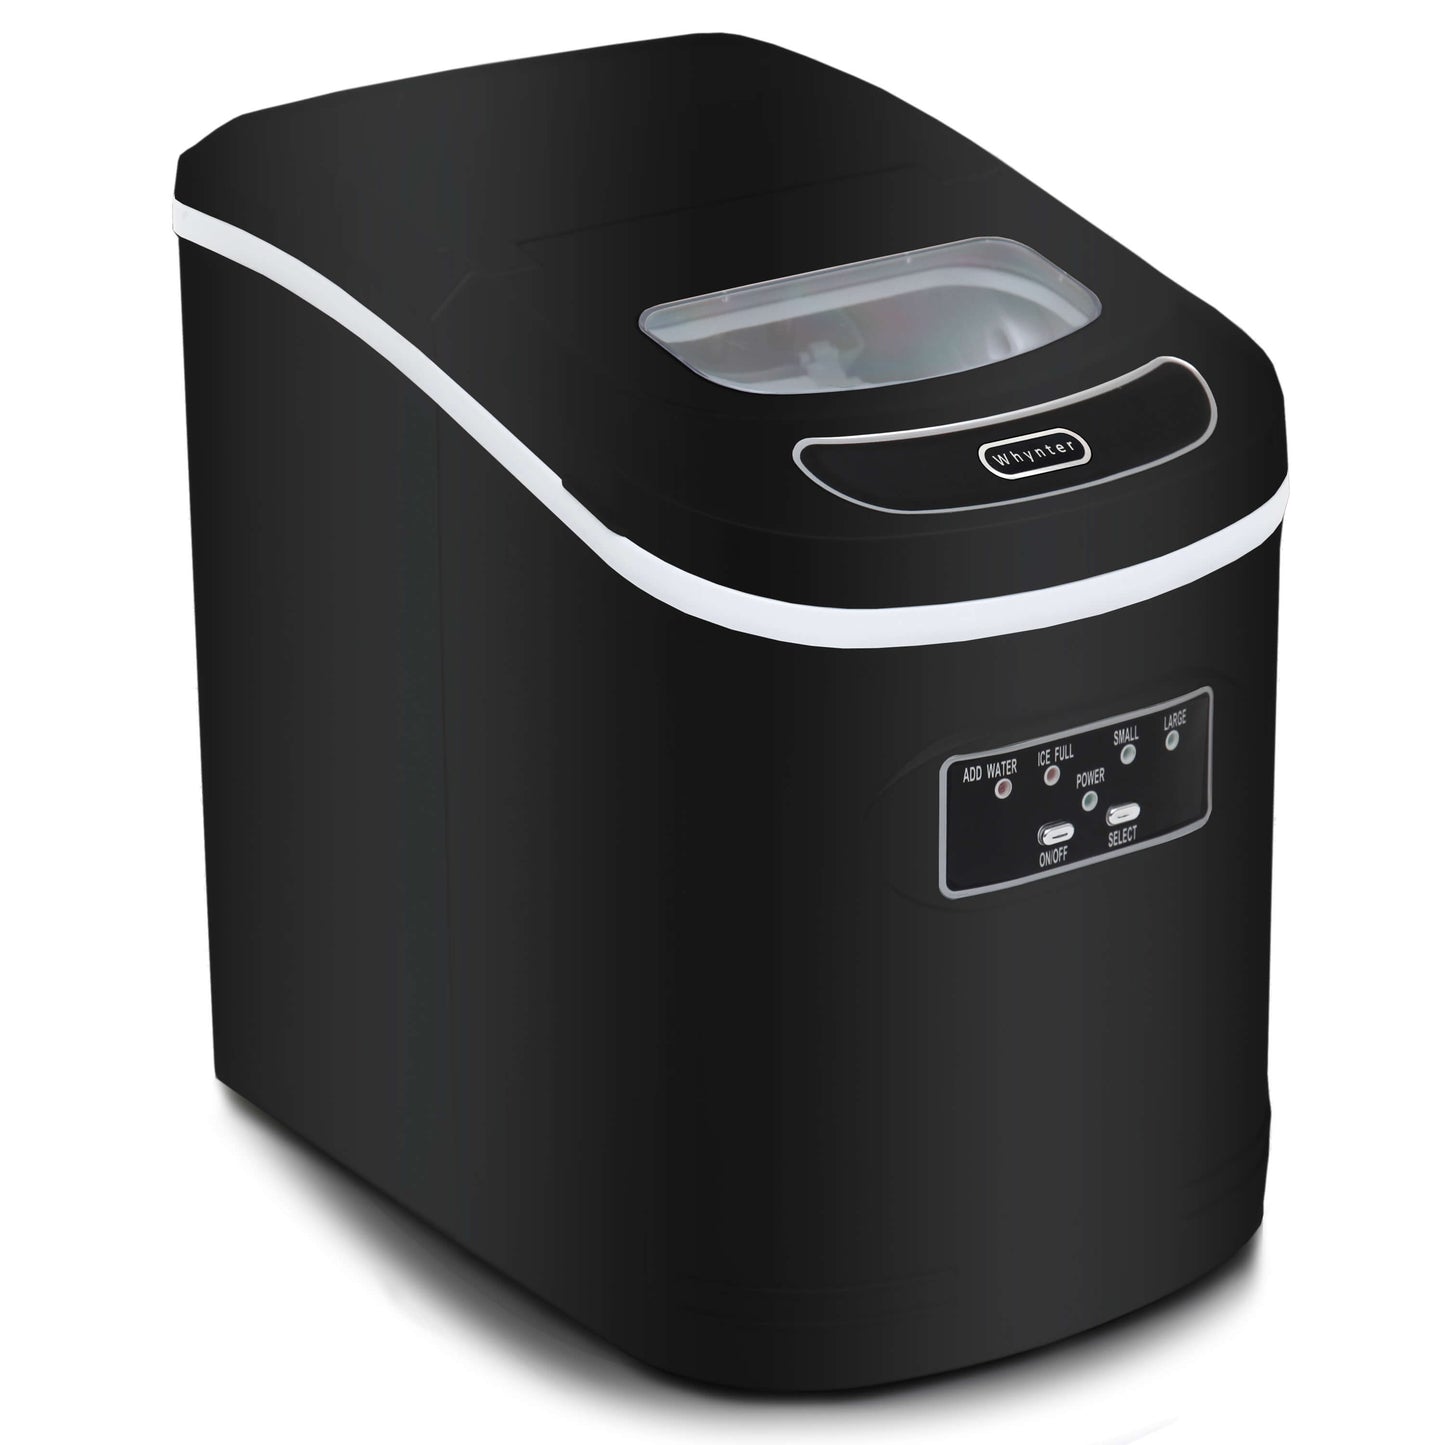 Whynter Ice Makers Whynter IMC-270MB Compact Portable Ice Maker 27 lb capacity – Metallic Black